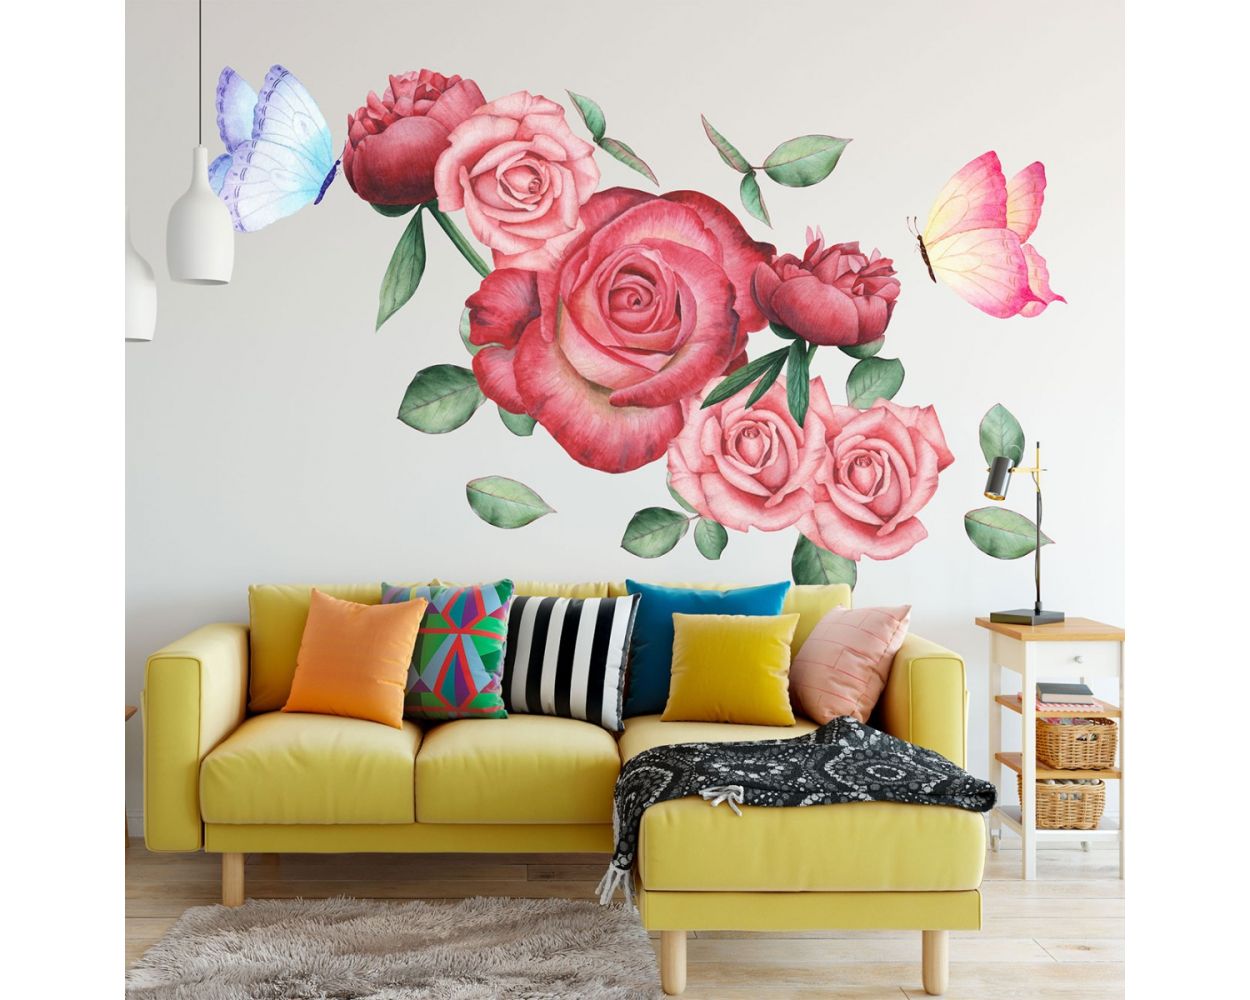 Pink Floral Wall Stickers